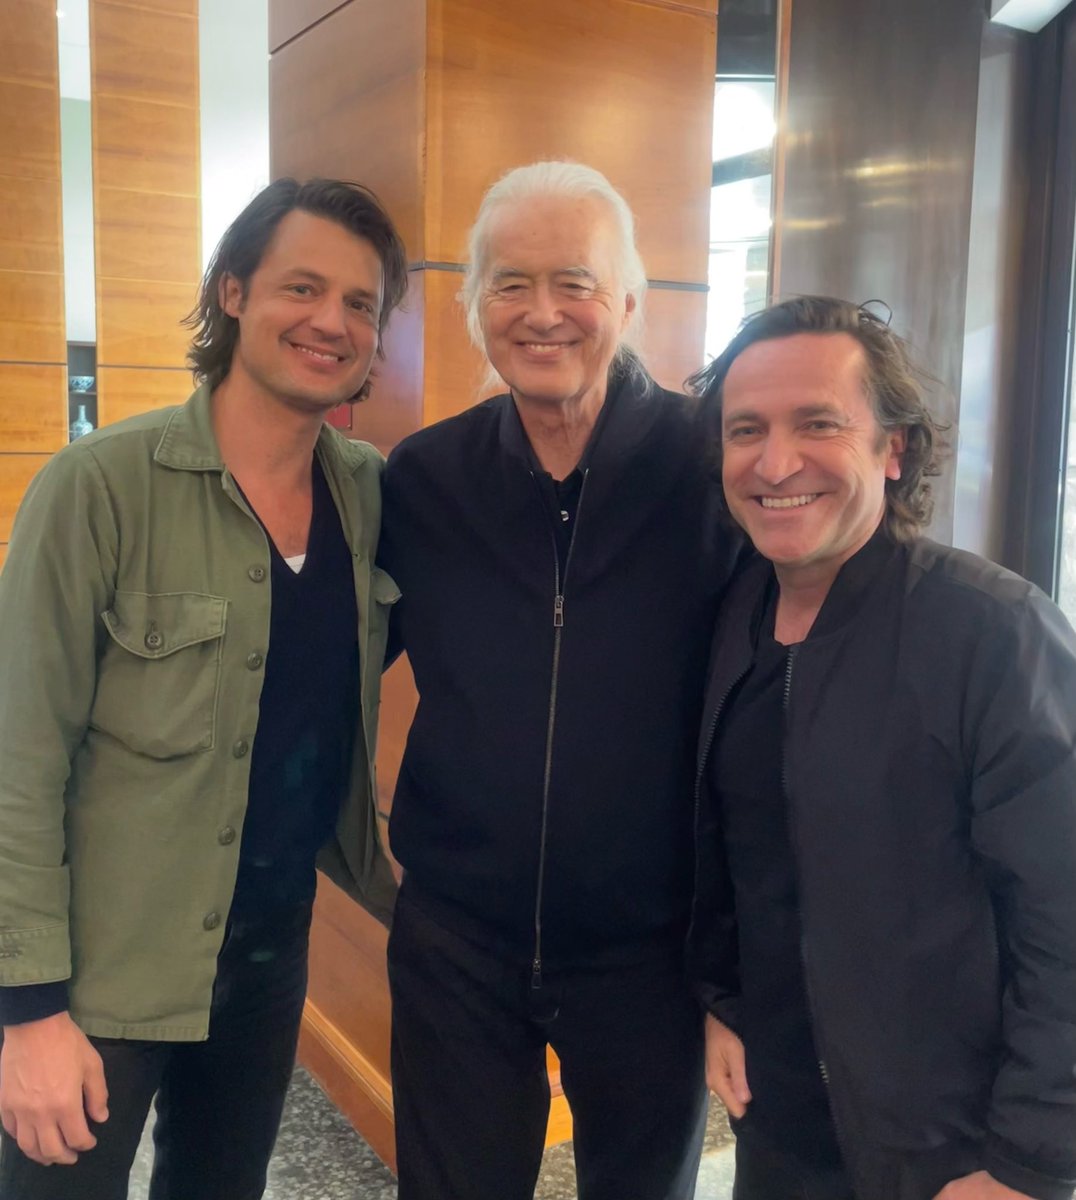 Jerry and Taylor selfishly get a picture with one of my heroes while I work all fucking day 🙄😉 @JimmyPage #iloveyouguys #jealous